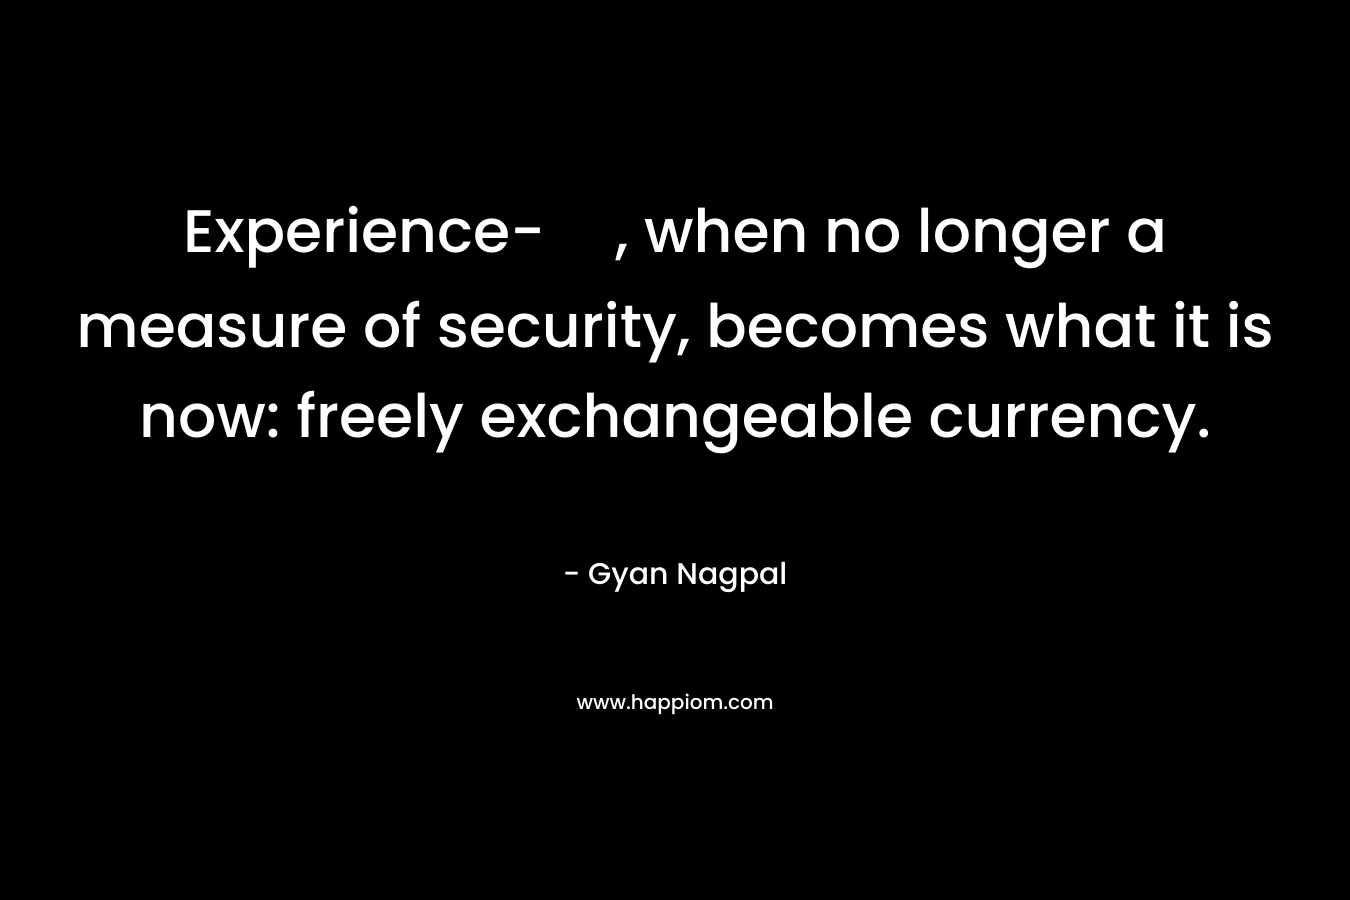 Experience-, when no longer a measure of security, becomes what it is now: freely exchangeable currency.